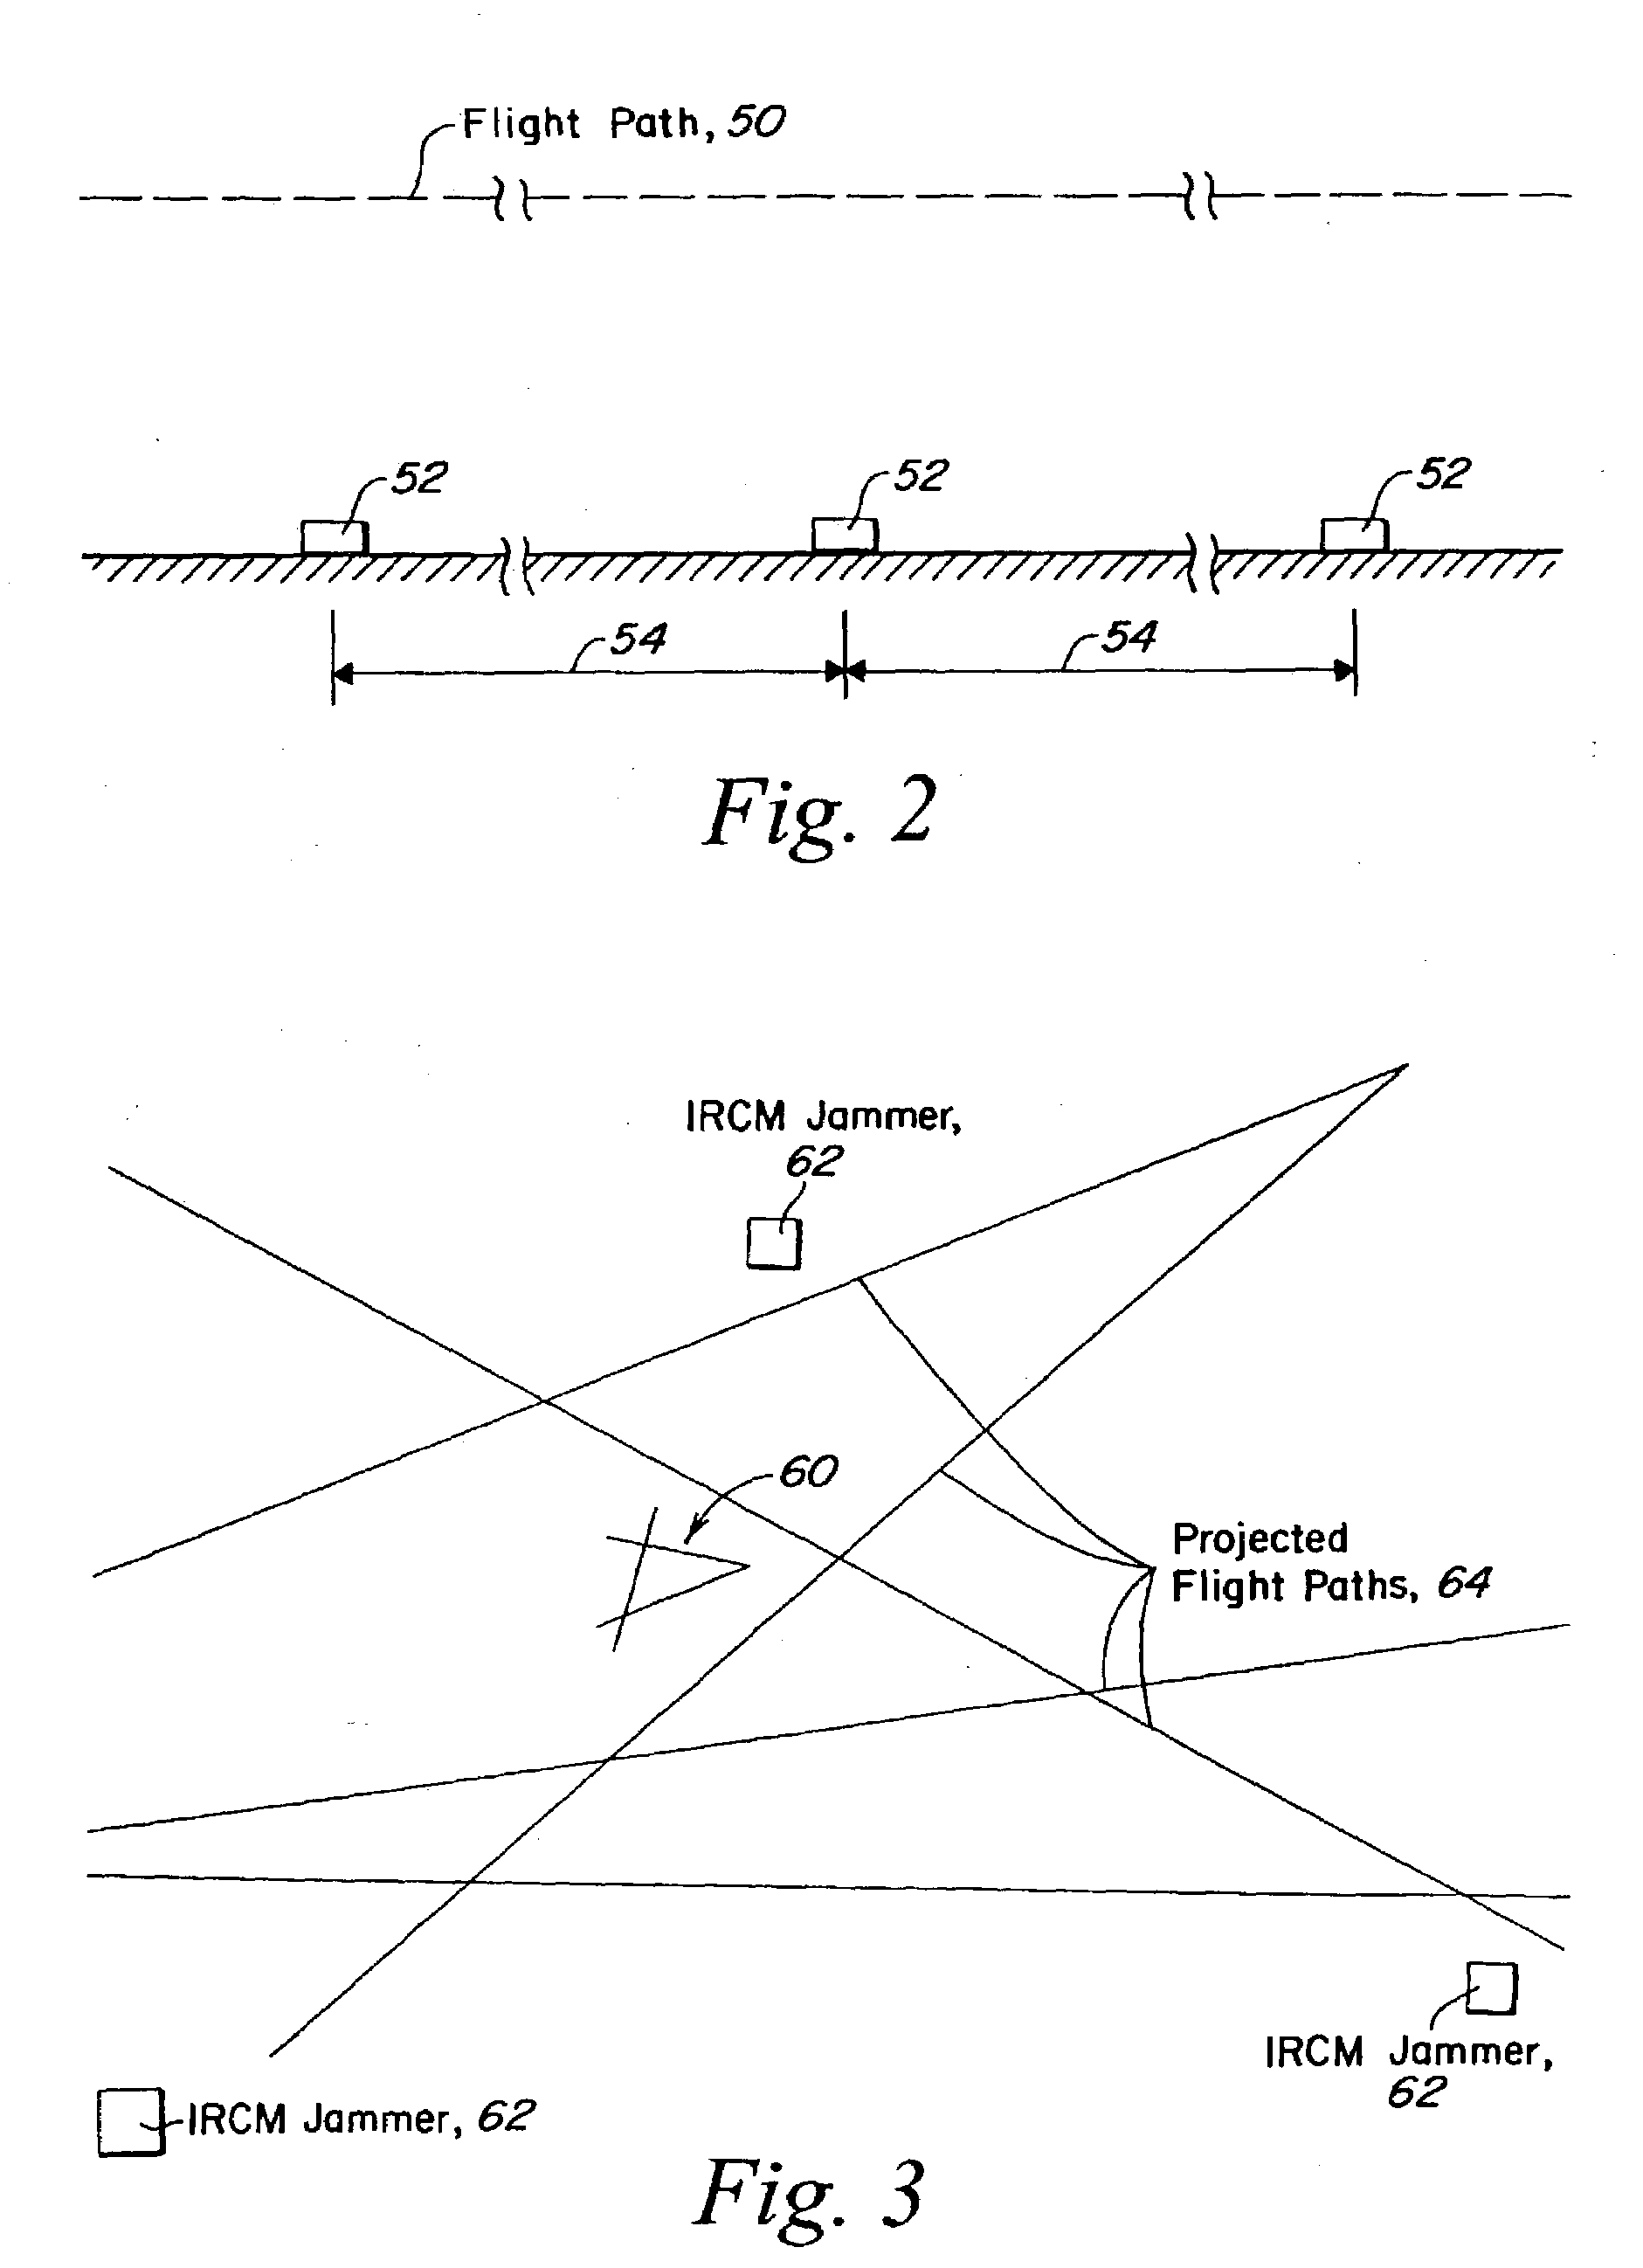 Back illumination method for counter measuring IR guided missiles